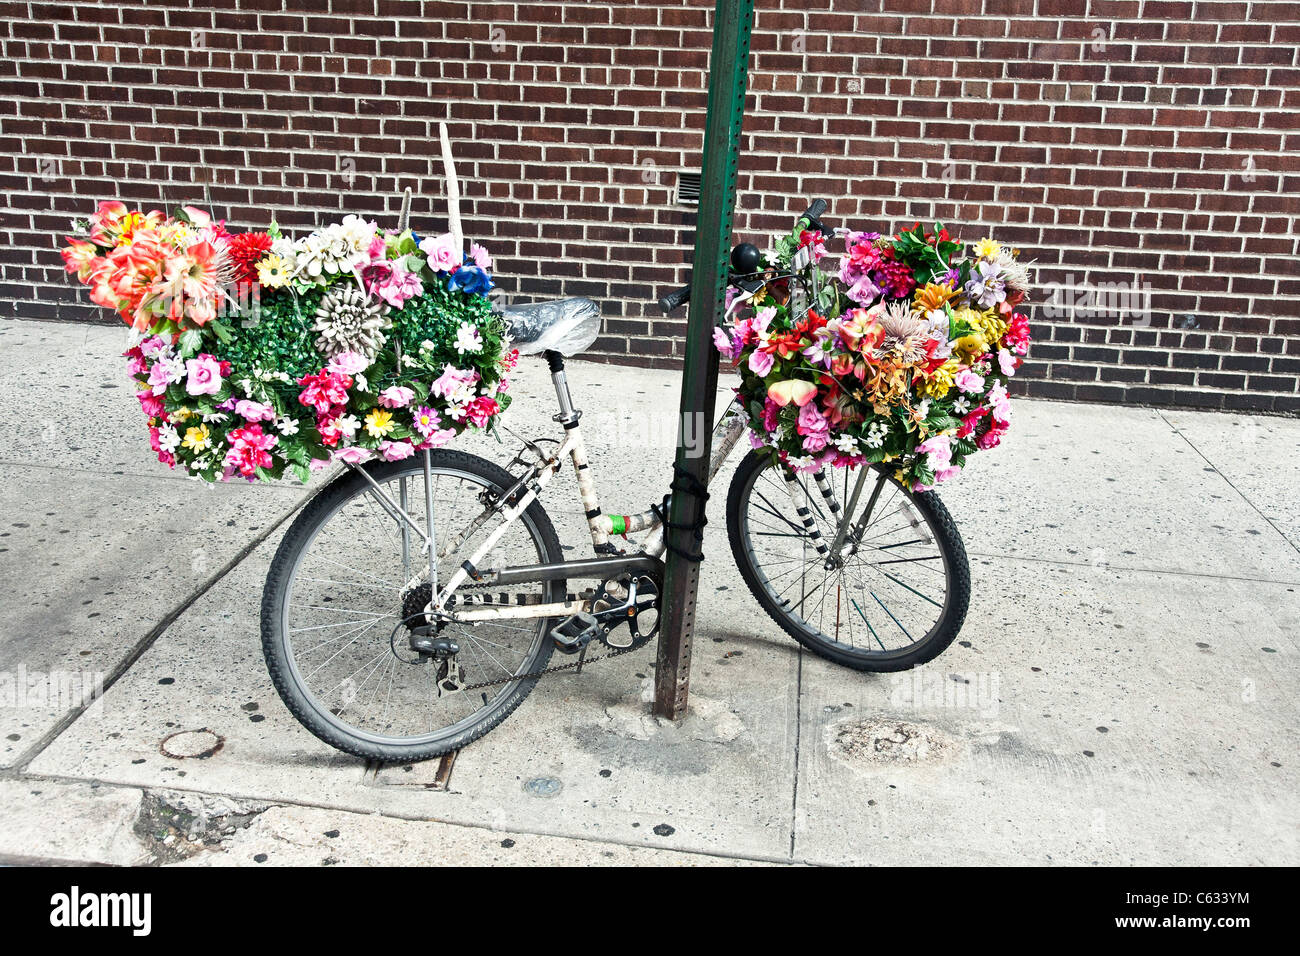 delivery bicycle with baskets heavily decorated with bright plastic flowers parked  west side Manhattan sidewalk New York City Stock Photo